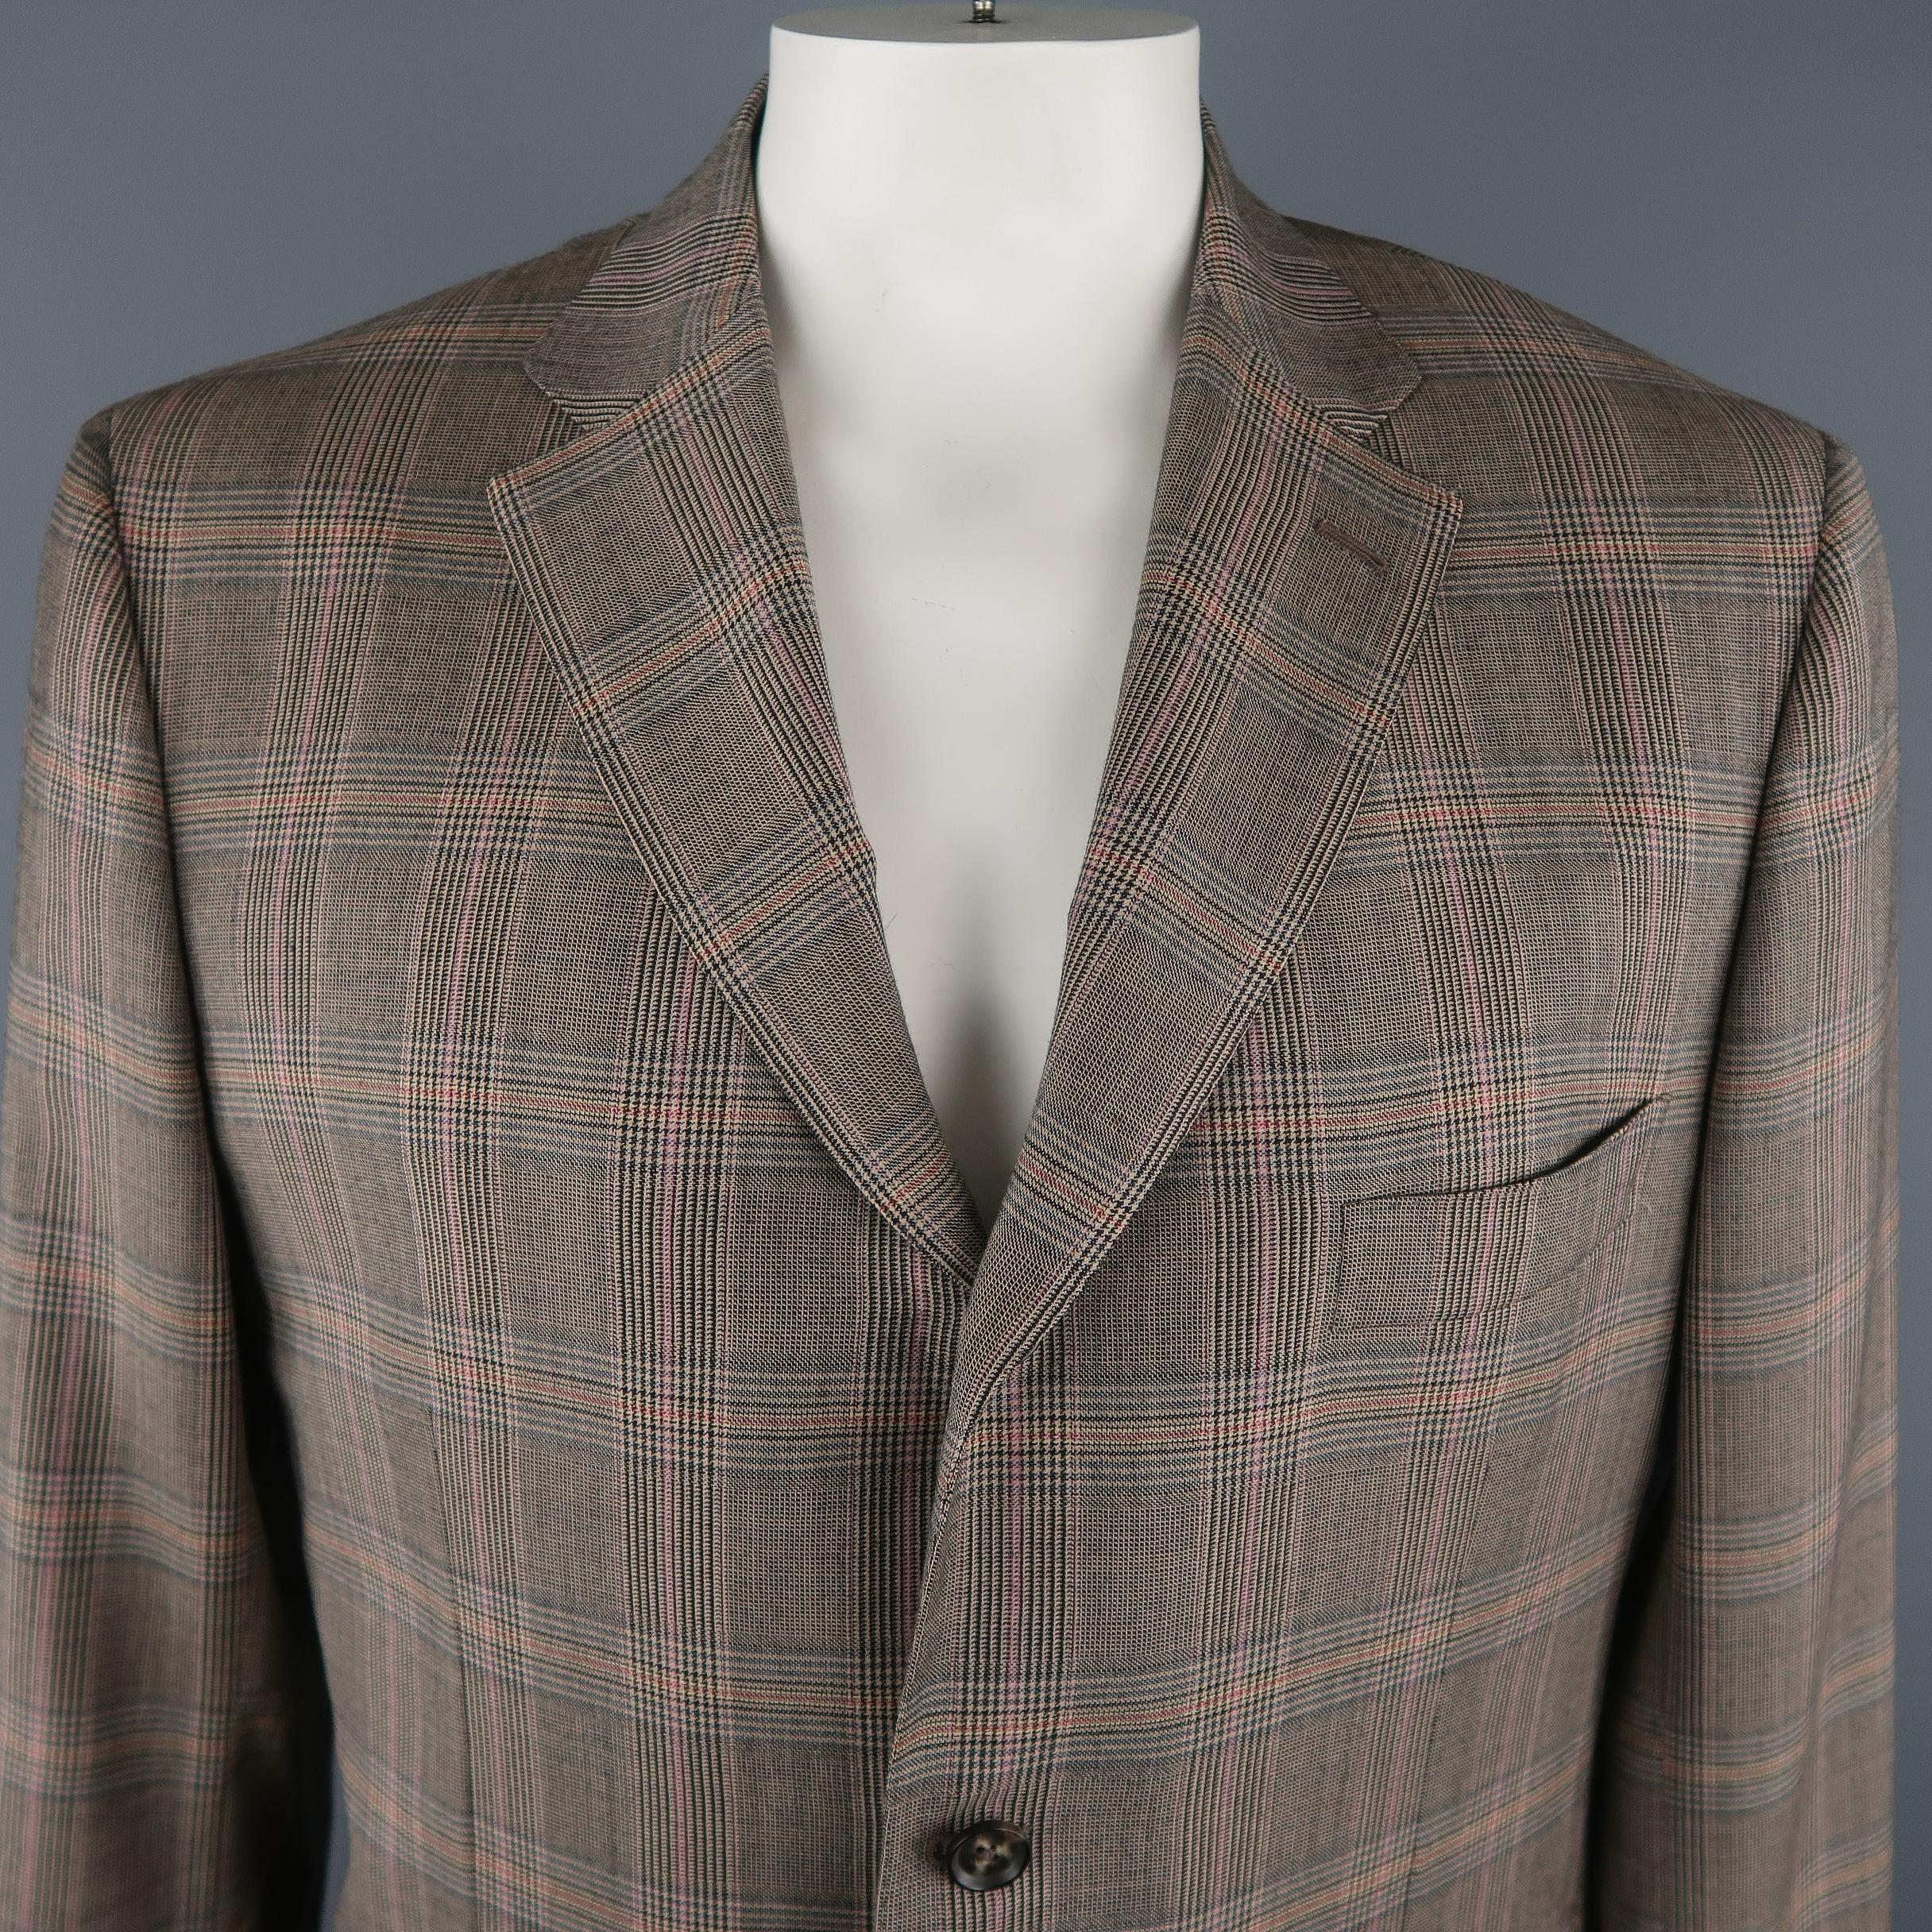 ISAIA  long blazer comes in brown tones in a plaid wool material, featuring a notch lapel, slit and flap pockets, 3 buttons closure, functional cuff buttons, single breasted. Light spot at front. Made in Italy. Retail price $ 2,795.00
 
Good